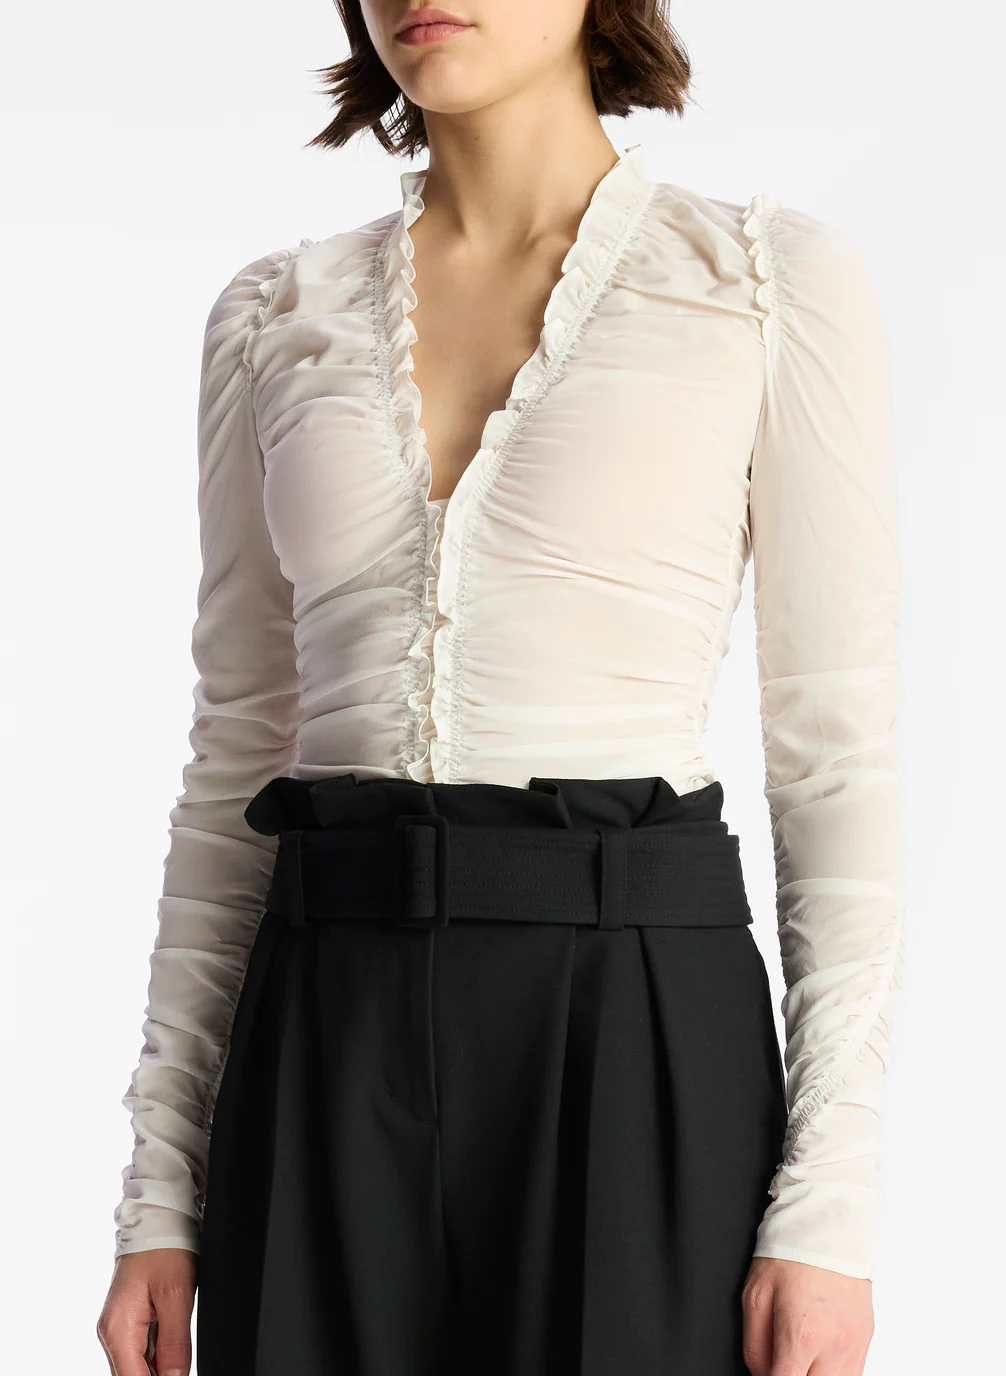 A.L.C Beckett Top in Whisper White available at The New Trend Australia.